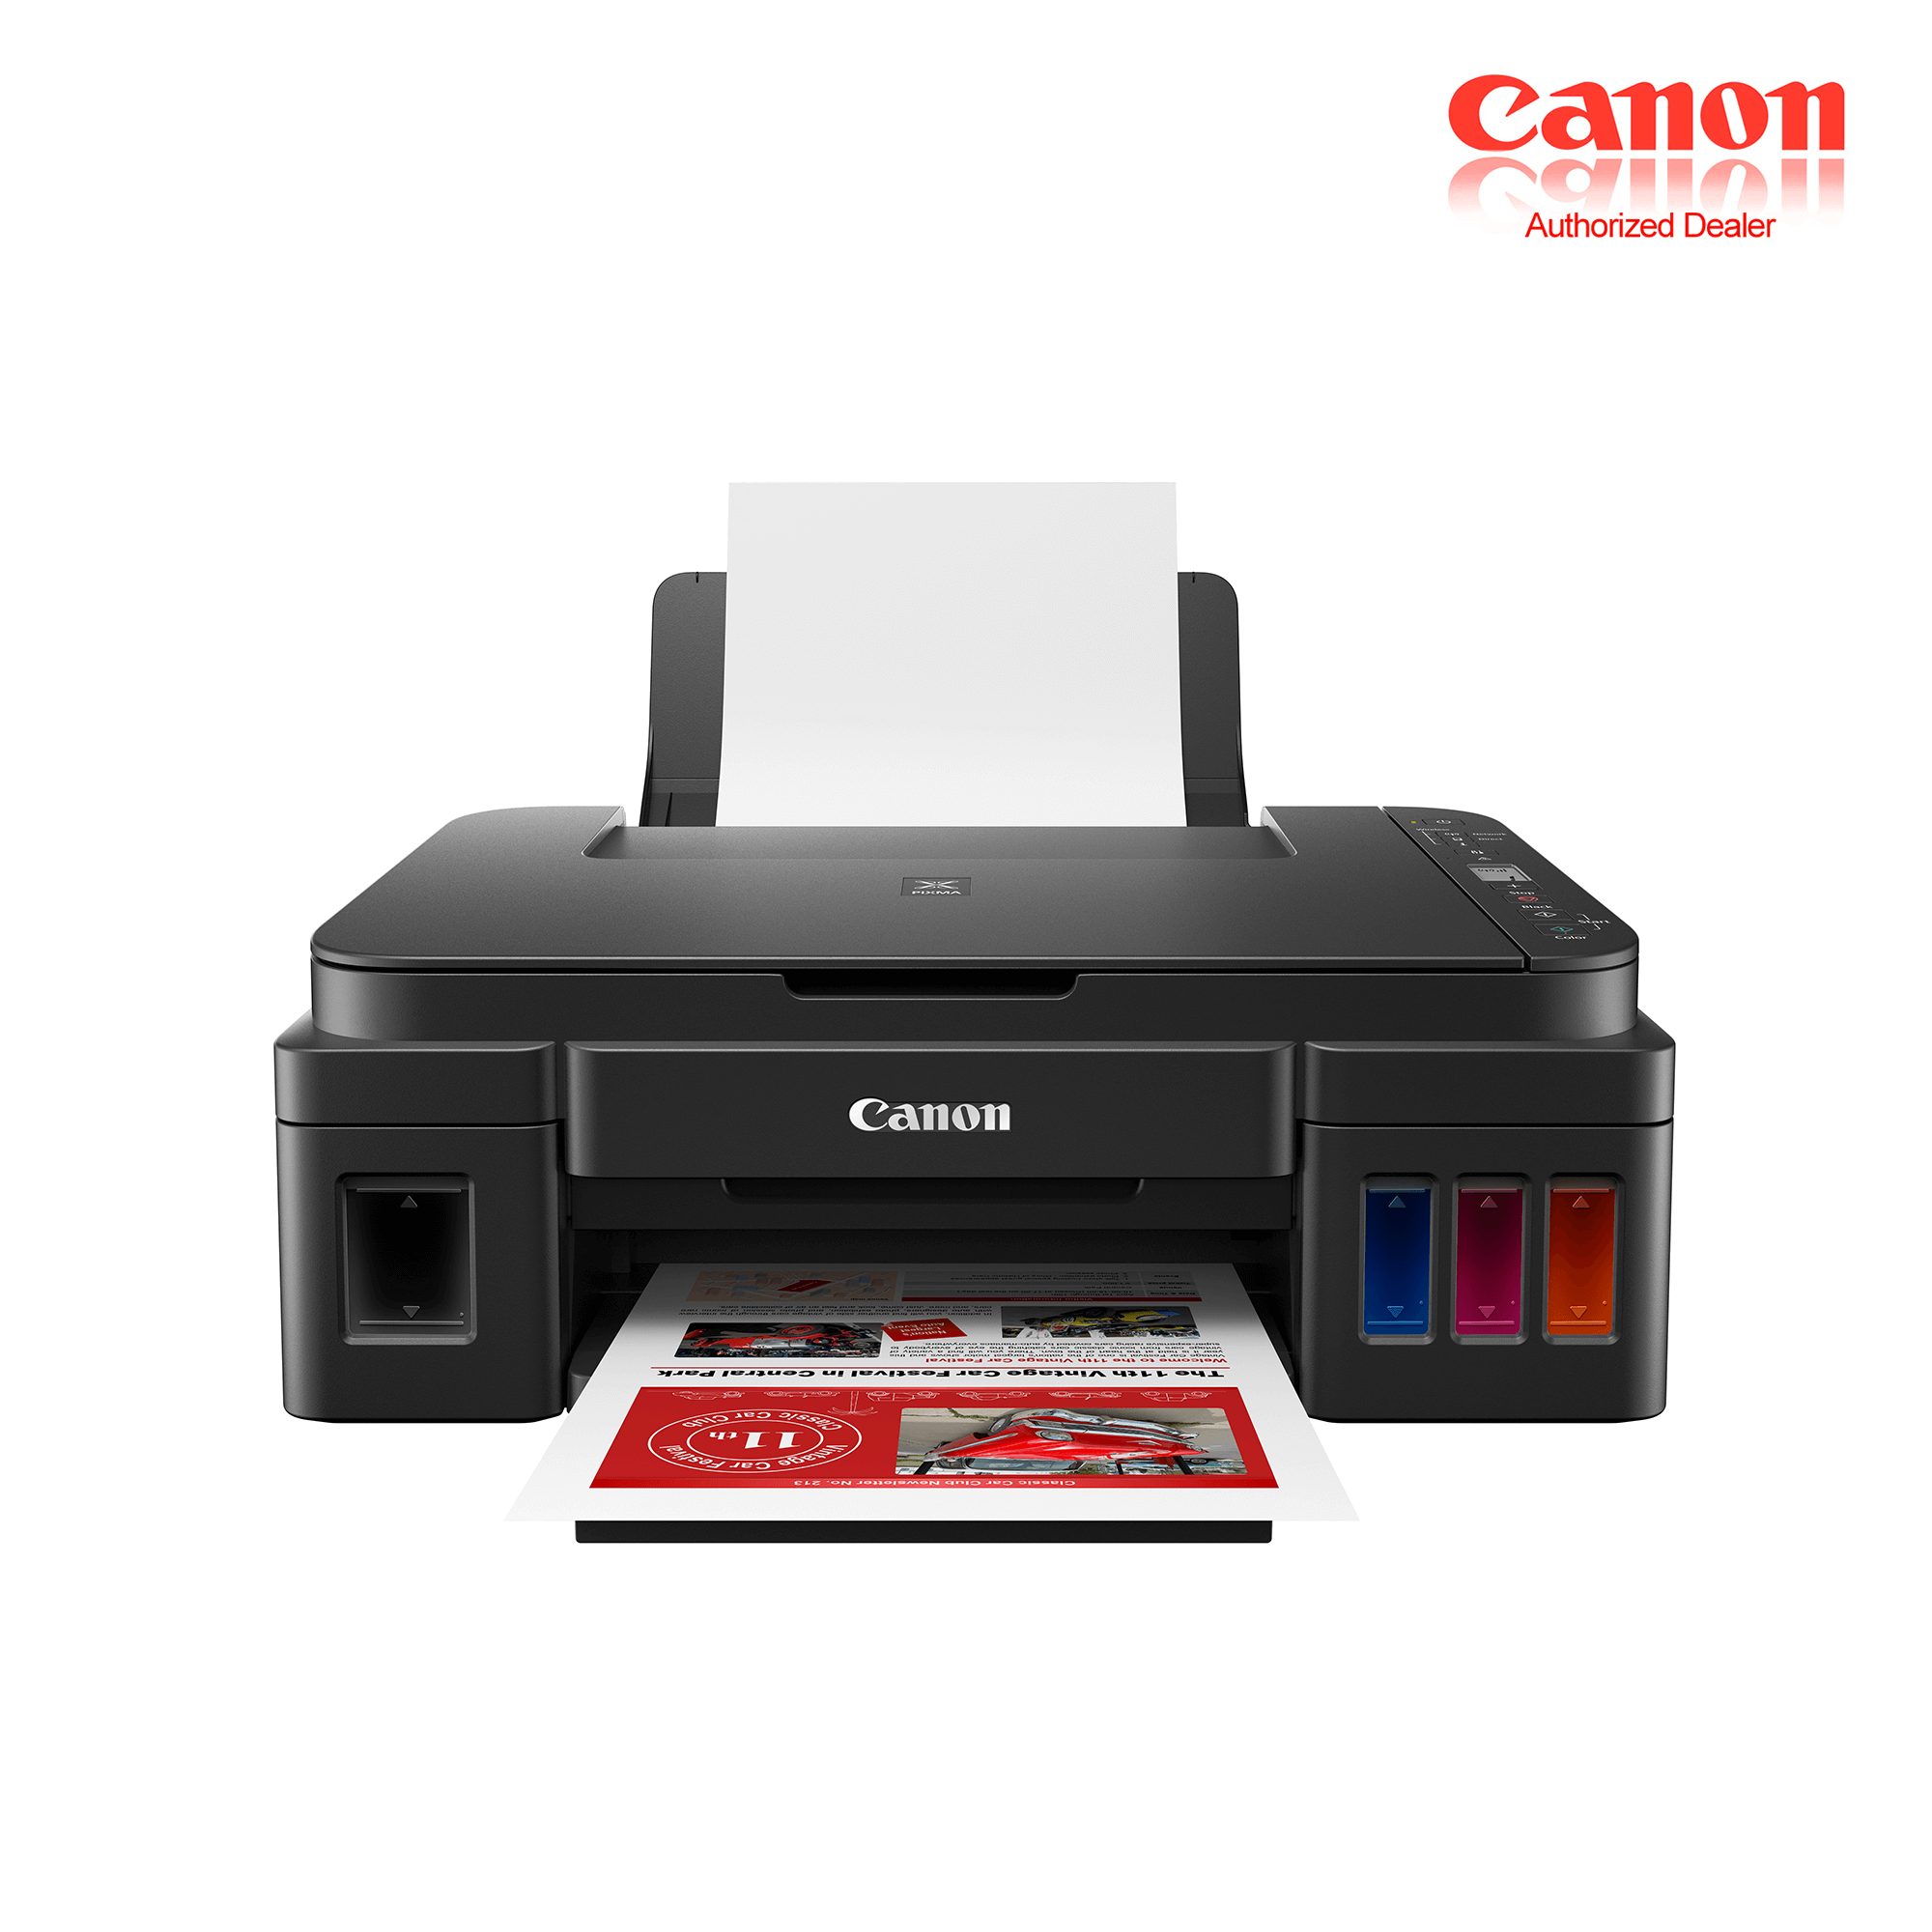 Canon PIXMA G3010 Refillable Ink Tank Wireless All In One Printer A4 flatbed scanner